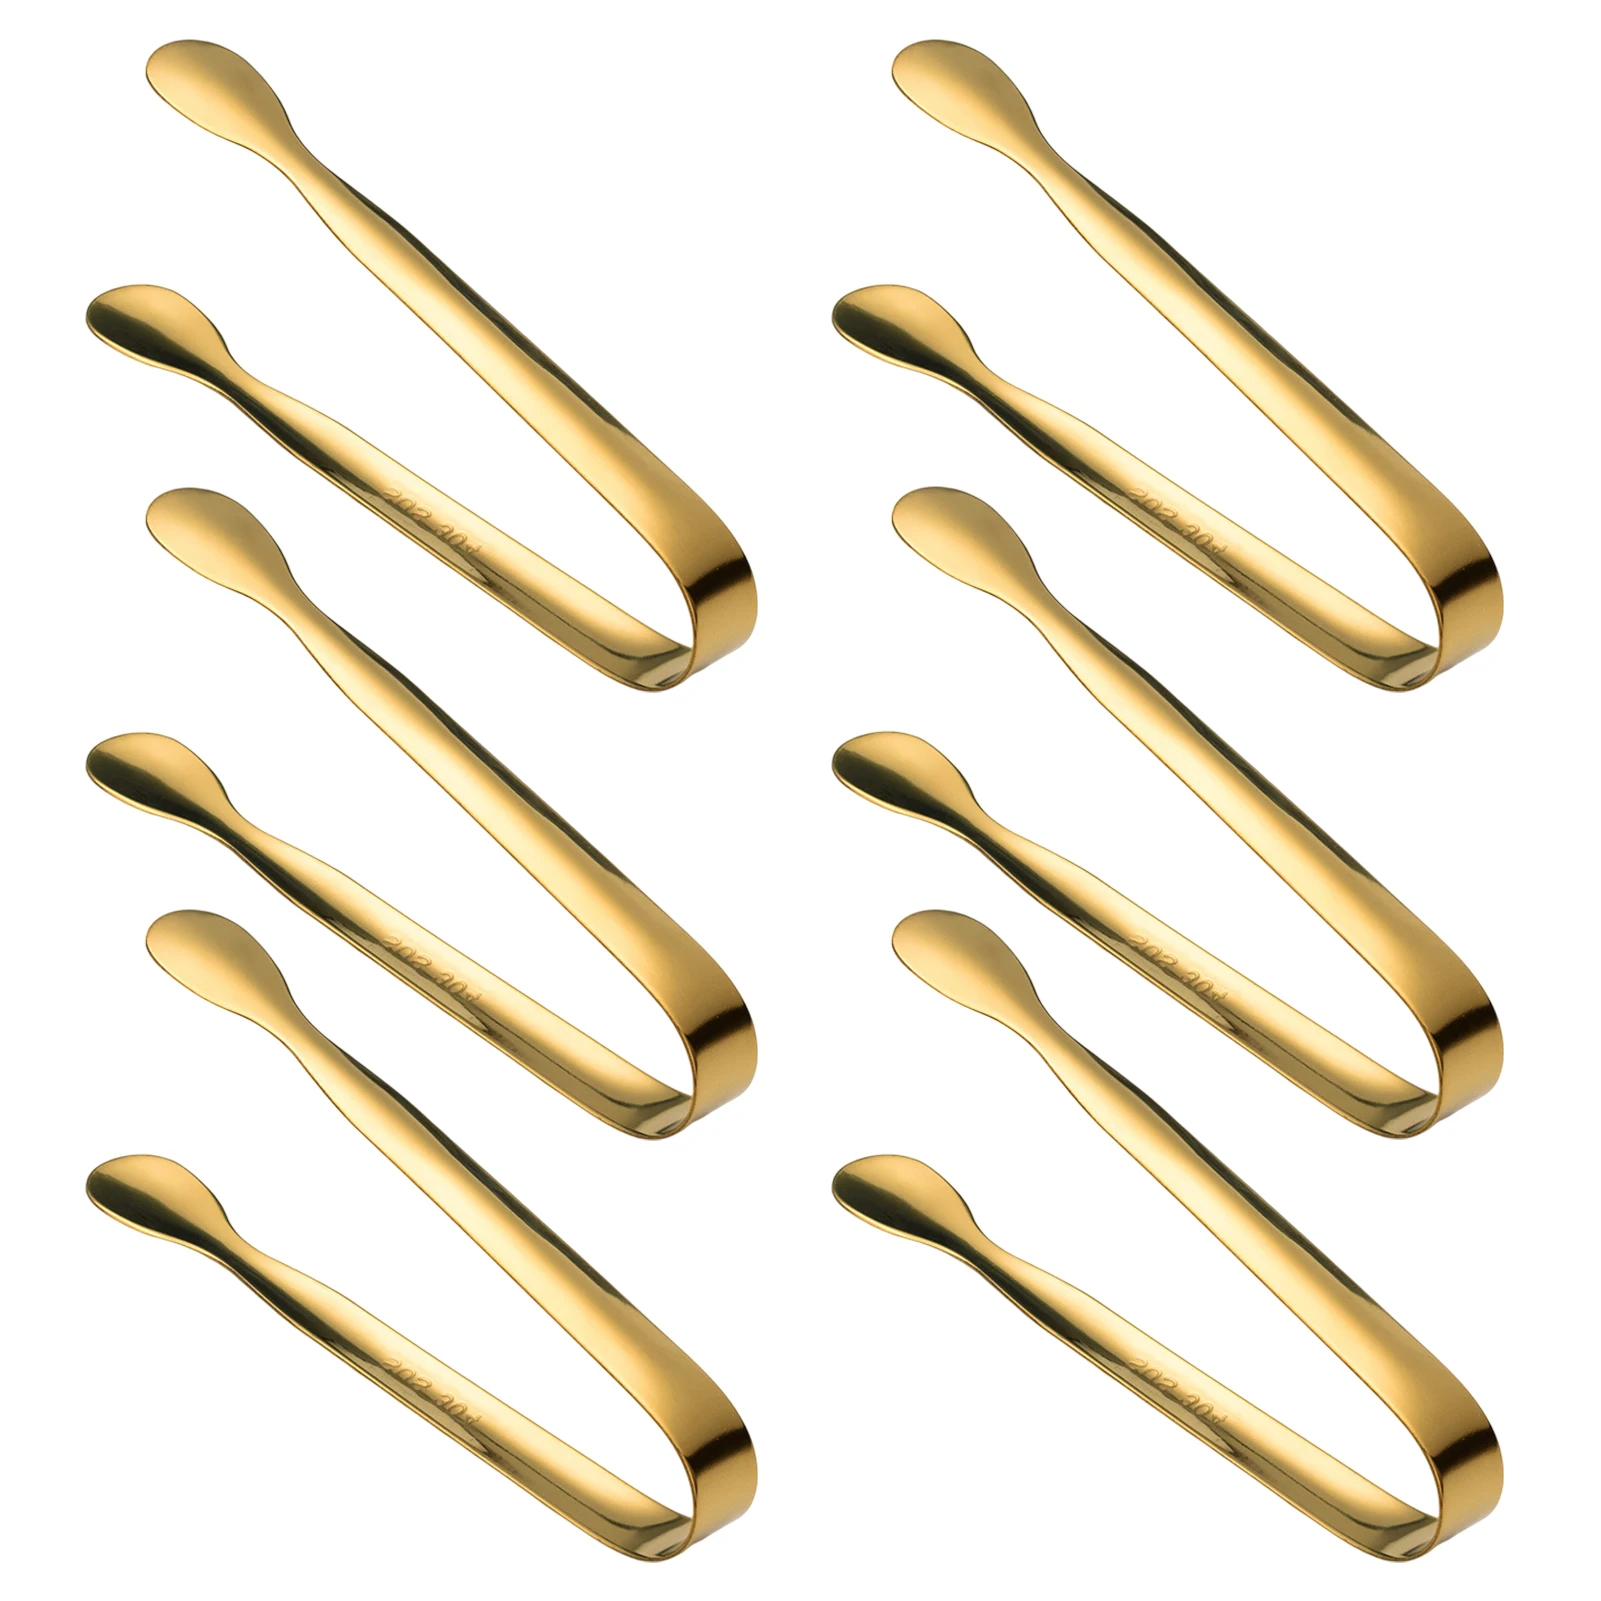 

6pcs Stainless Steel Rust Proof Smooth Handle Durable Gold Kitchen Utensils Lightweight Parties Food Serving Ice Tongs Wedding